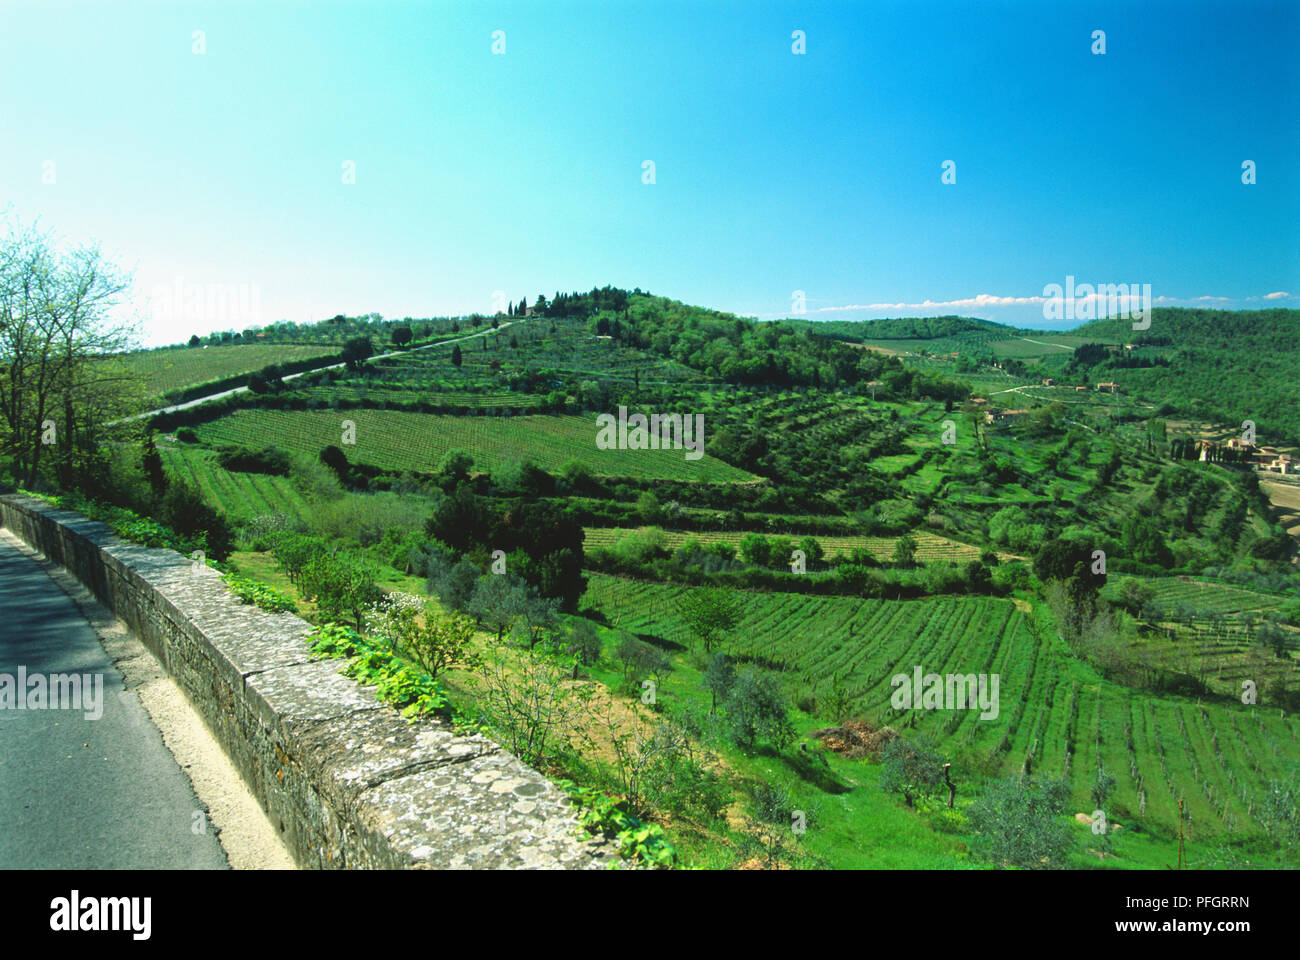 Italy, Tuscany, Chianti, Panzano, view of hills covered in green vegetation. Stock Photo